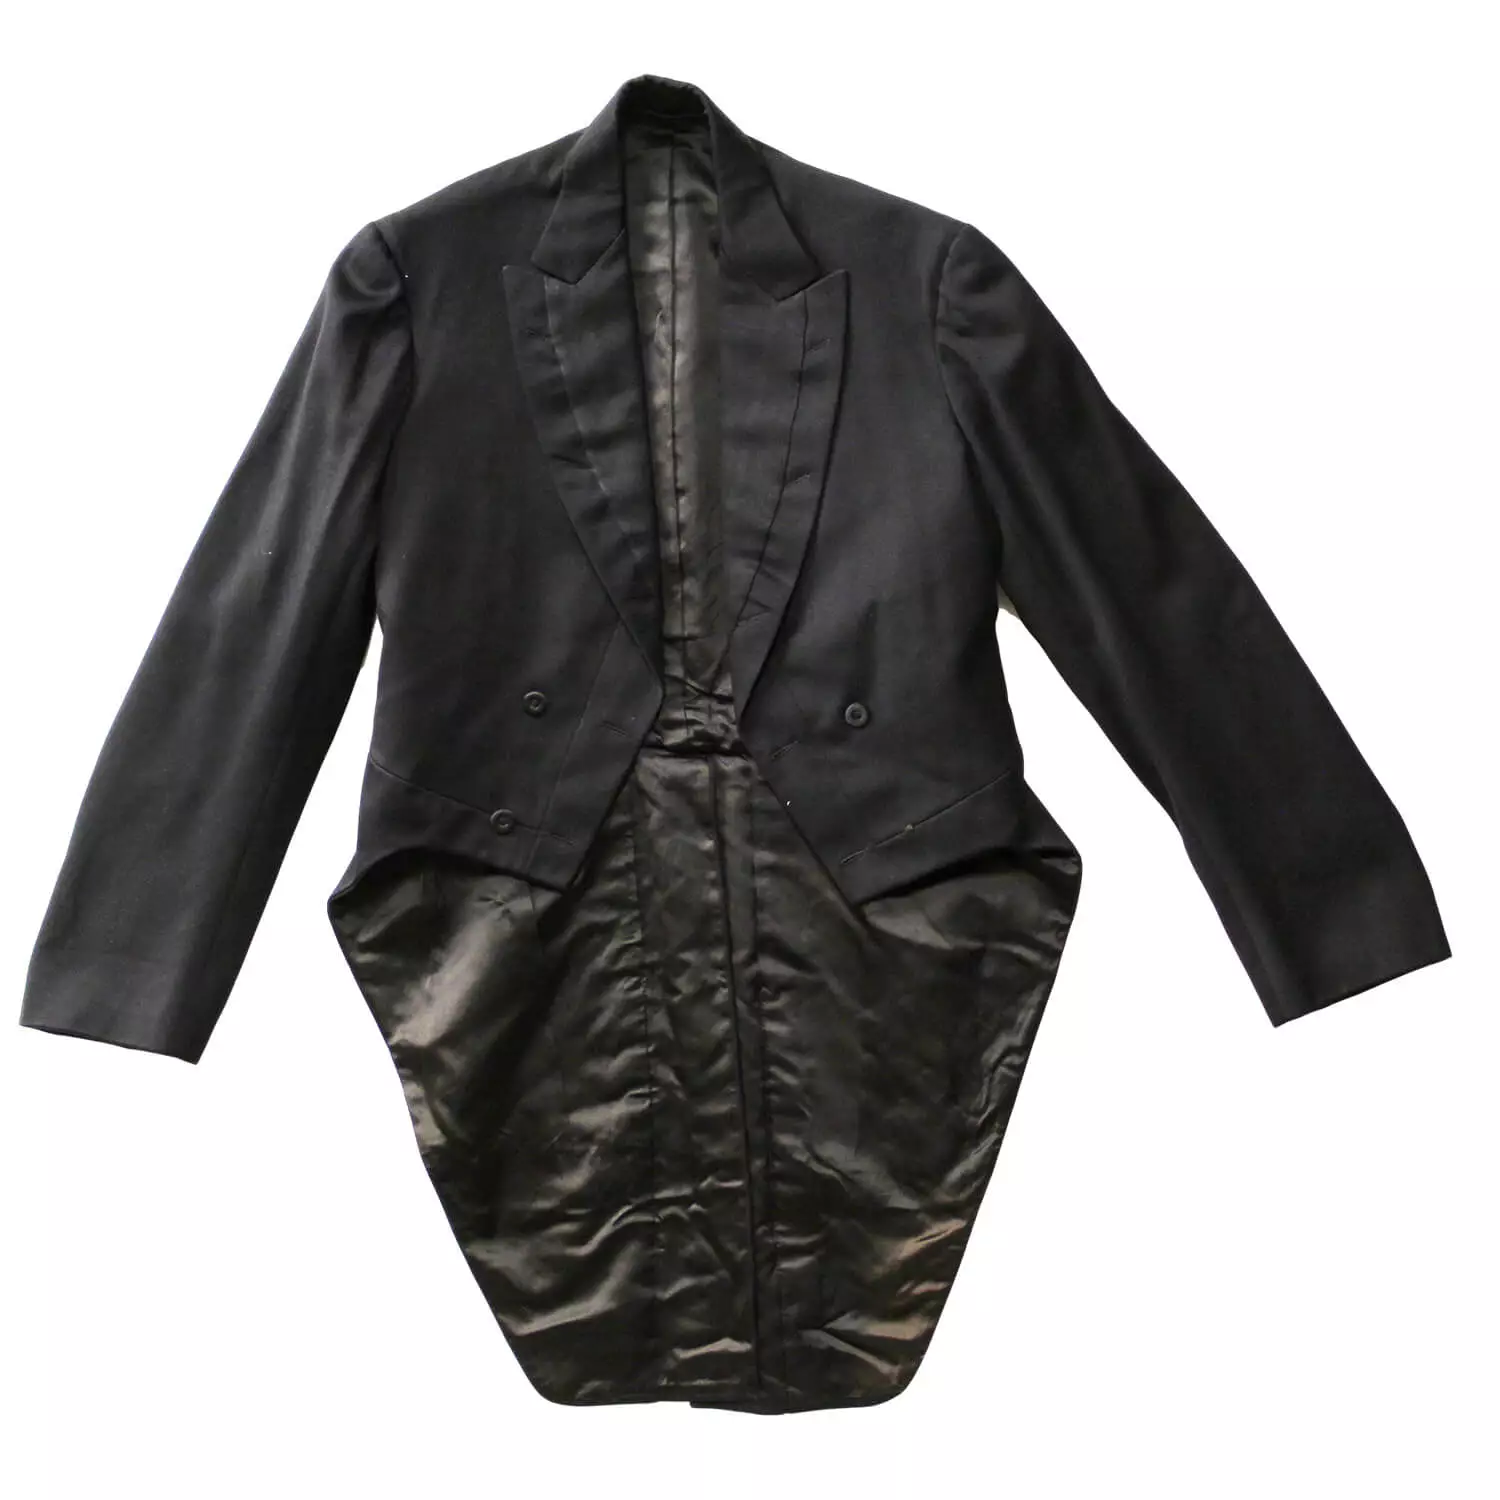 black long sleeved jacket that is much longer in the back than in the front.